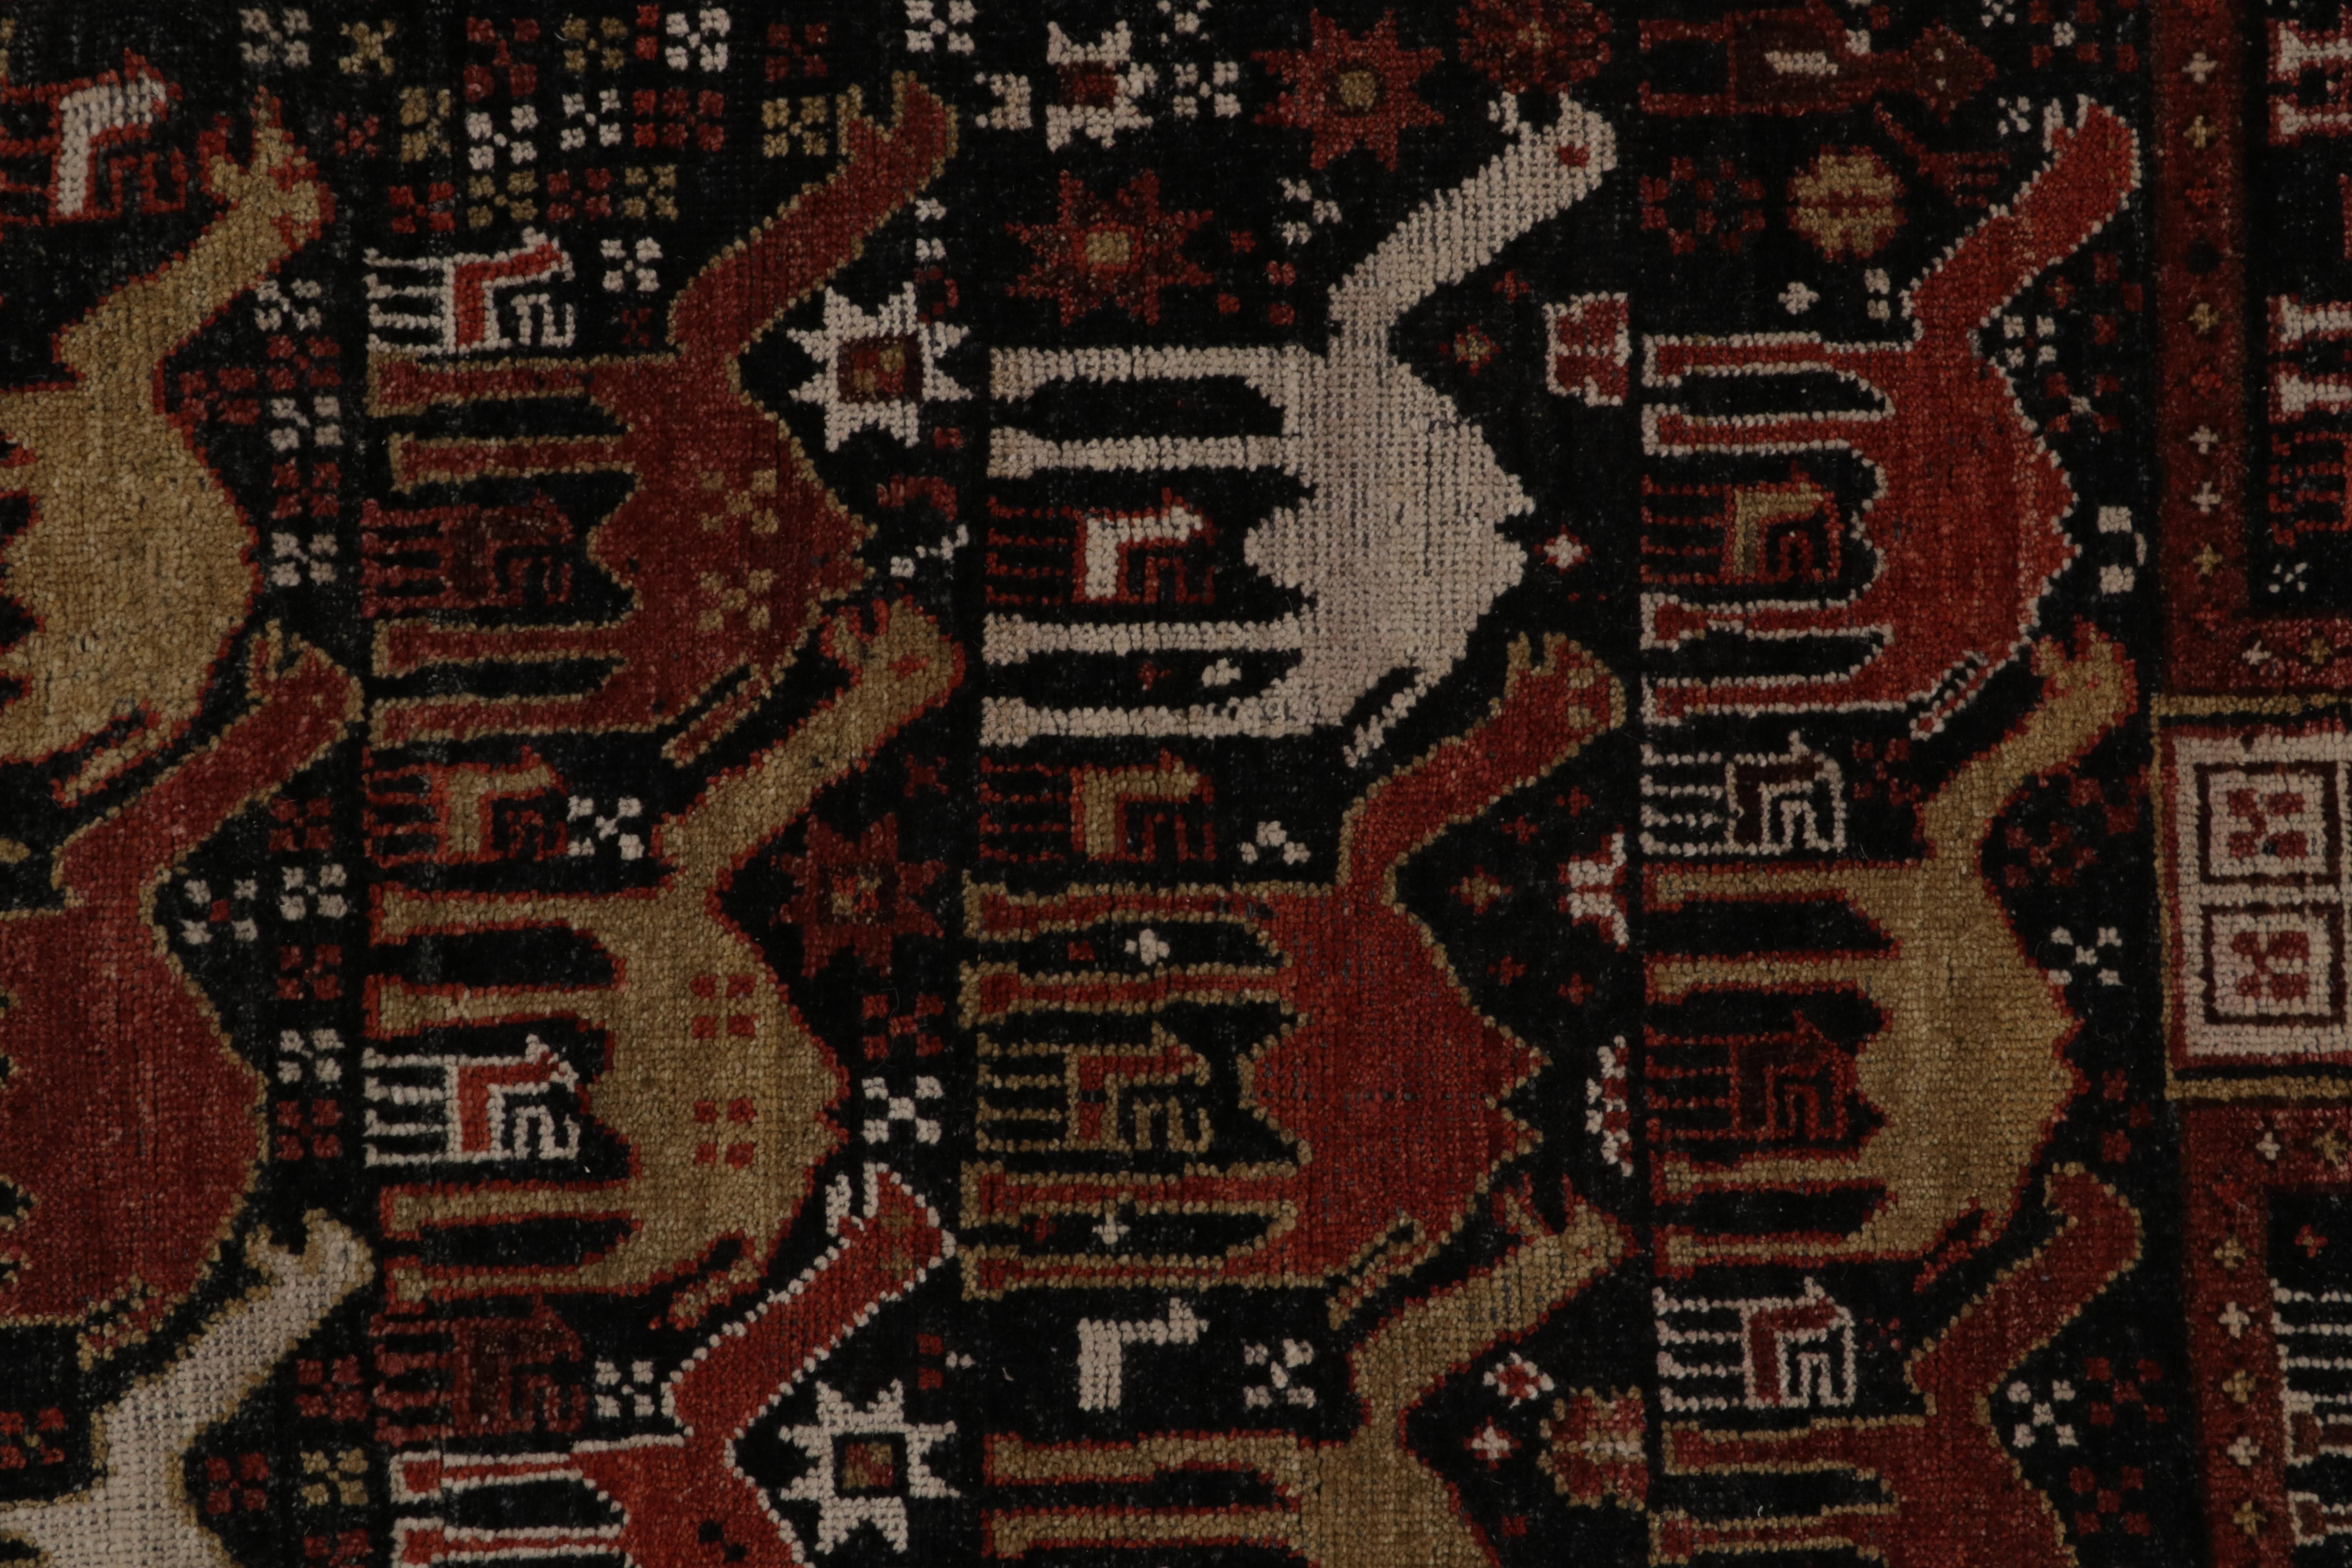 Contemporary Rug & Kilim’s Shirvan Tribal Style Rug in Red, Orange & Brown Pictorial Patterns For Sale